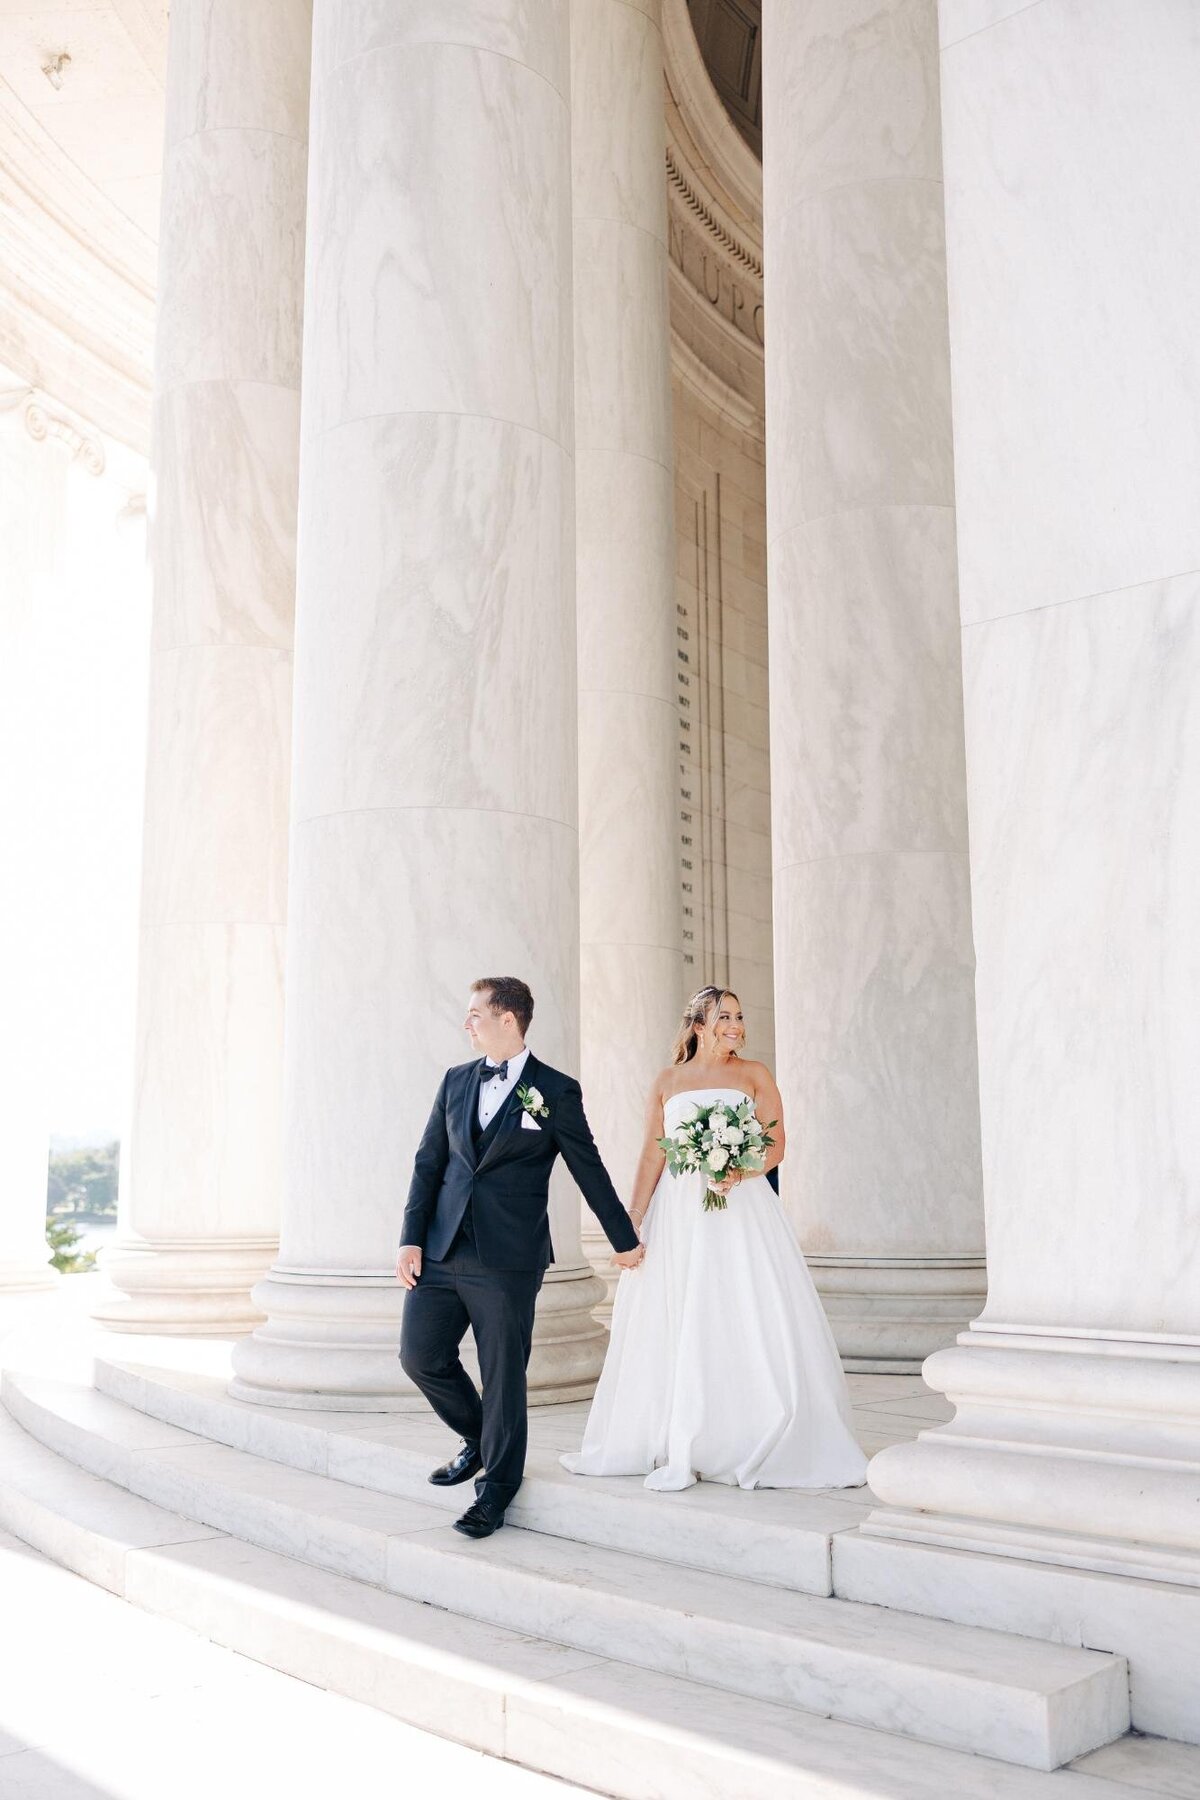 A wedding couple holding hands beside large pillars, with the groom looking at the bride as they both stand in natural light.